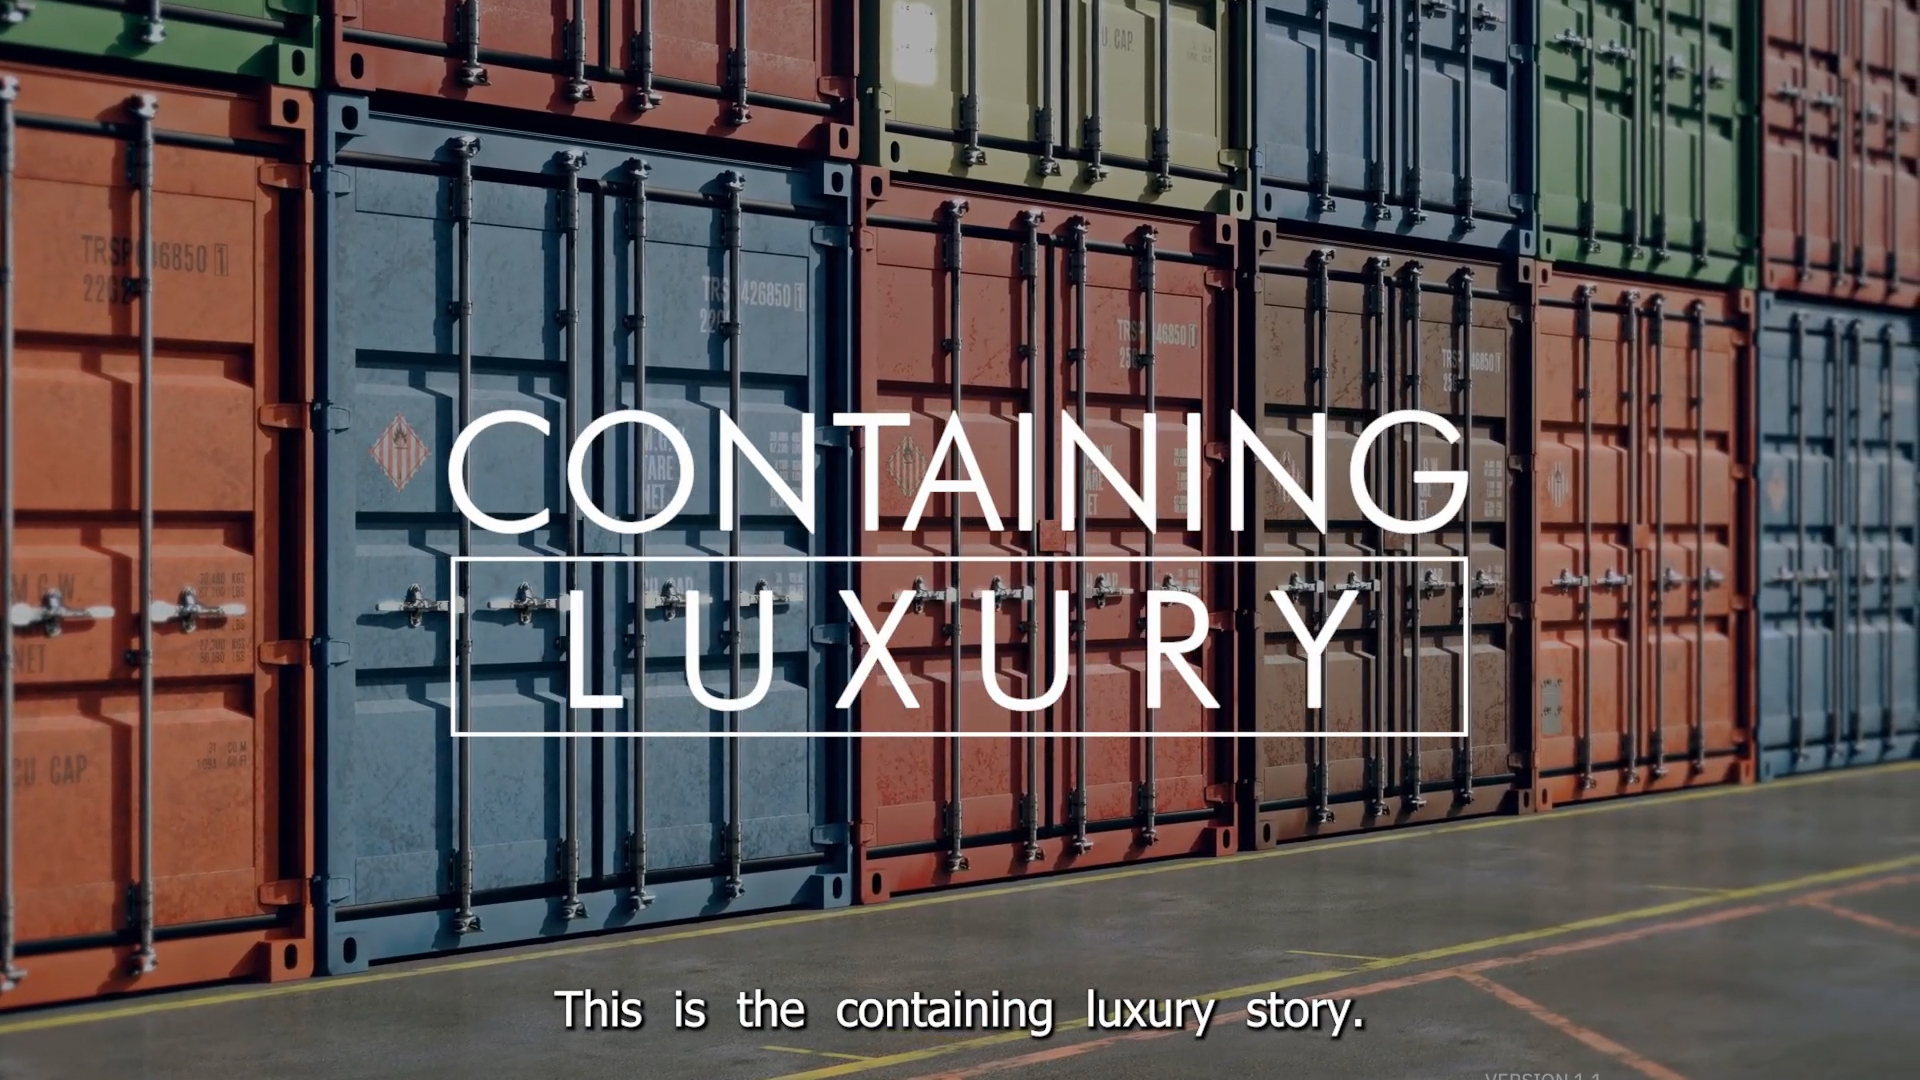 Our luxury container homes are designed with affordability, safety, and efficiency in mind. Join us on Start Engine for our crowdfunding raise!